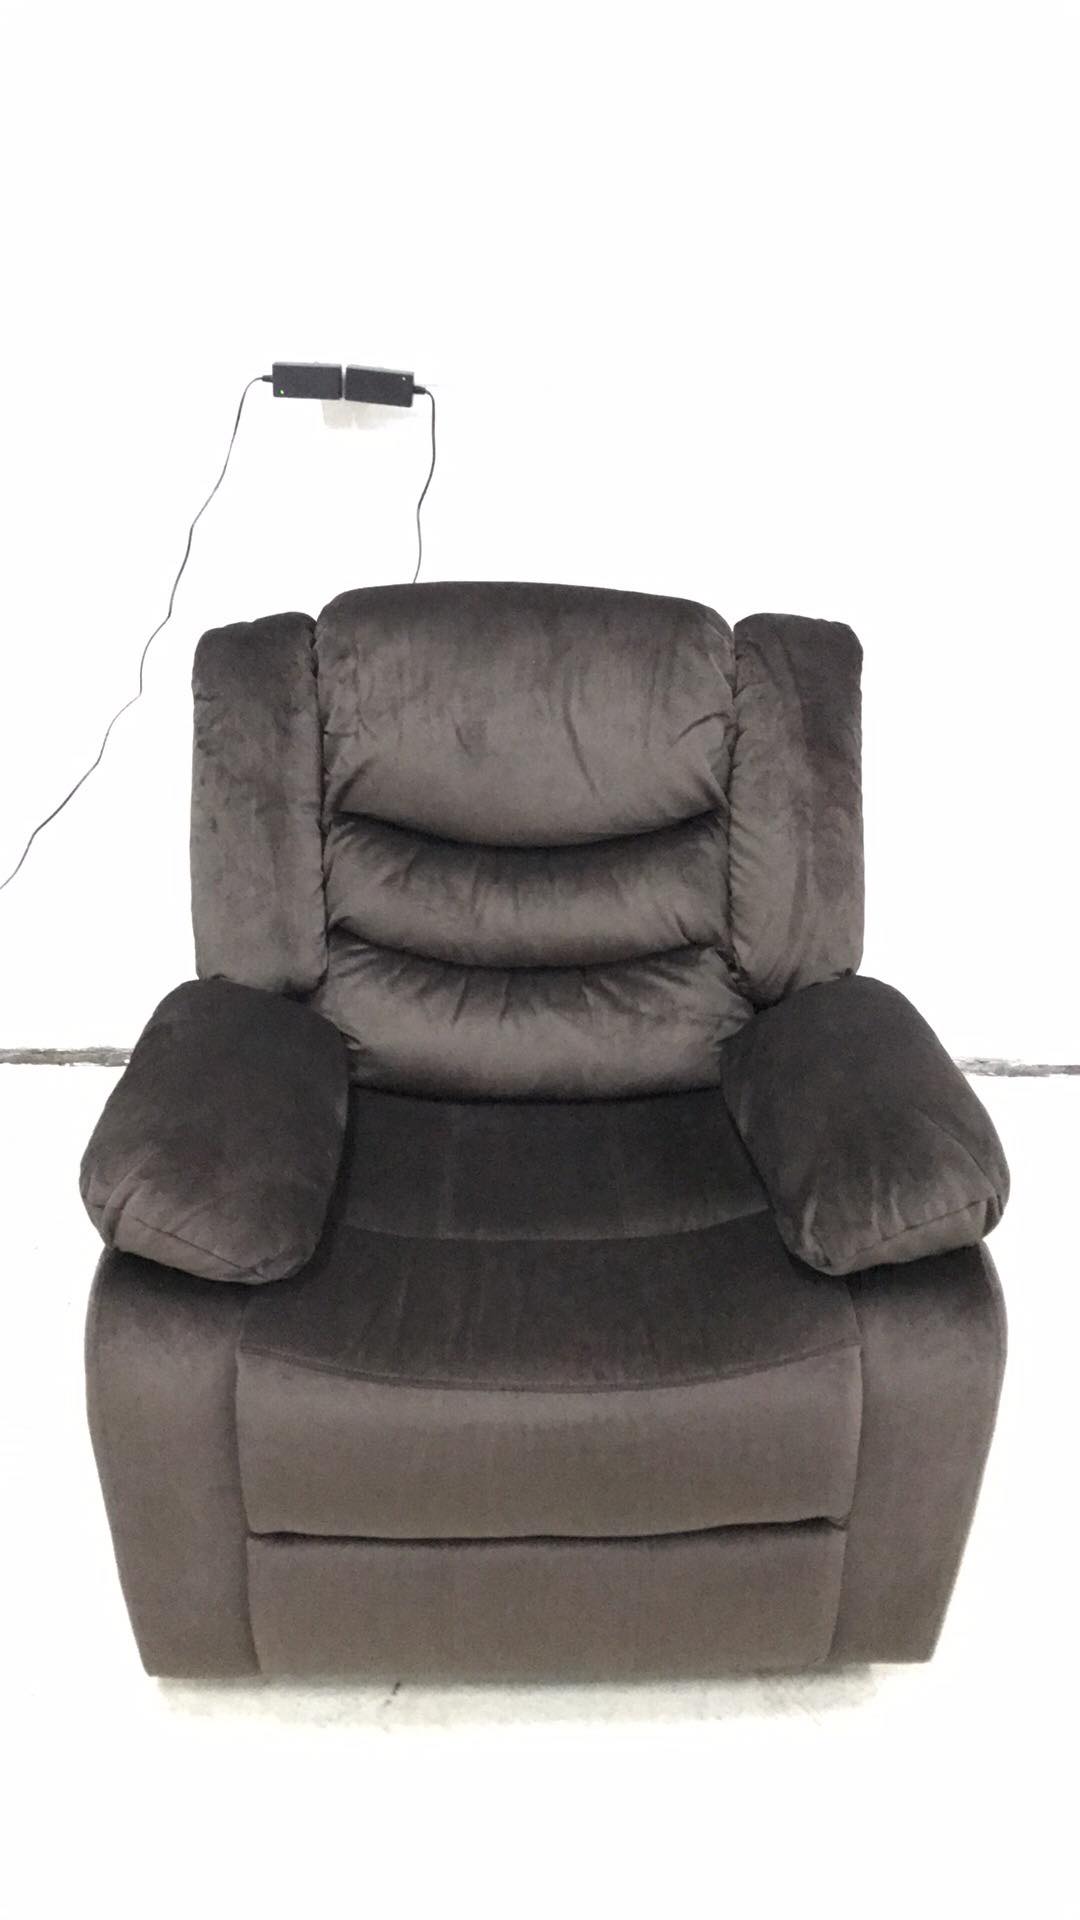 WEEKLY or MONTHLY. Urbino Chocolate POWER Recliner